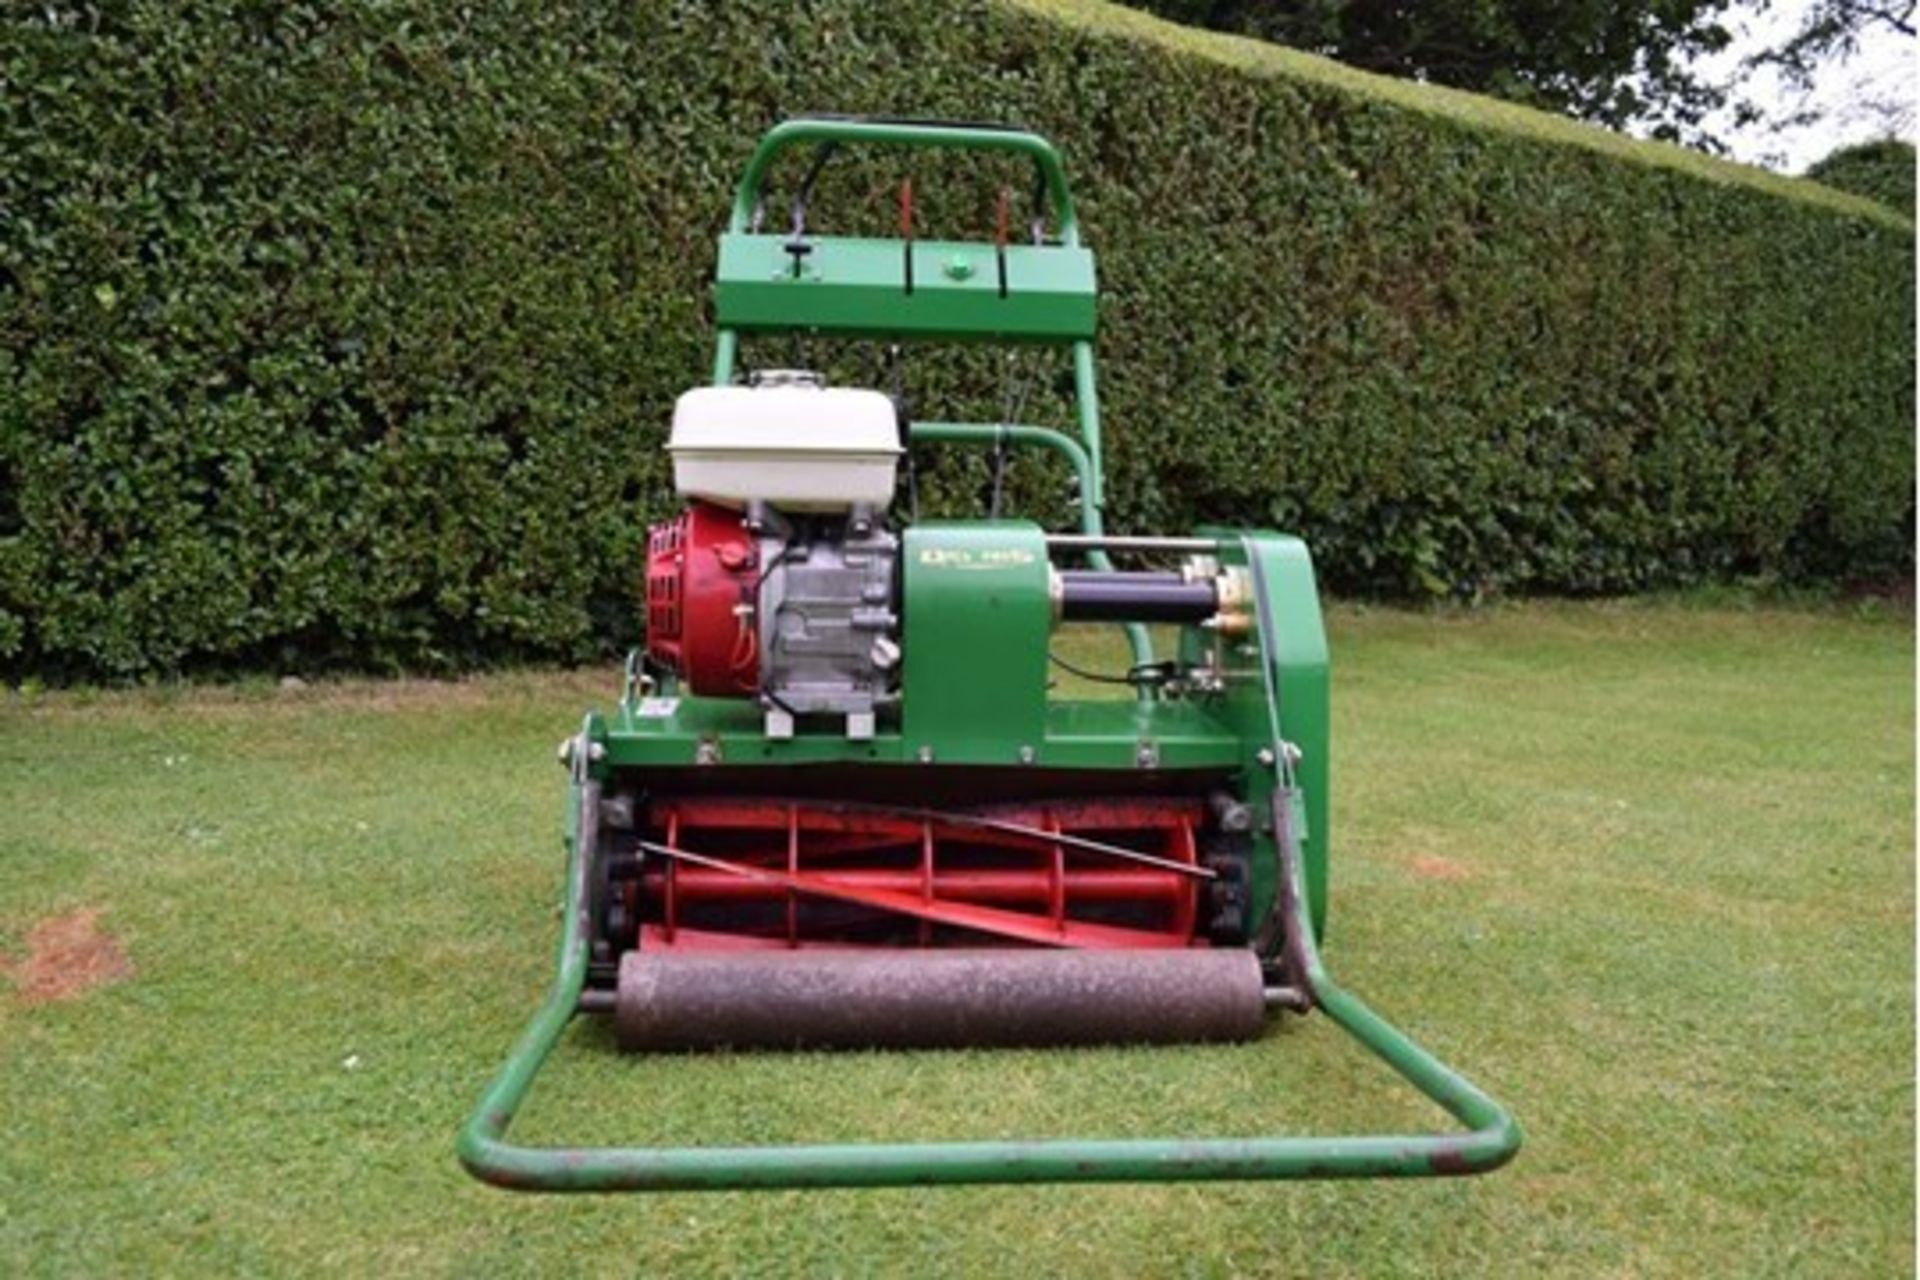 2004 Dennis G560 5 Blade Cylinder Mower With Grass Box - Image 12 of 12